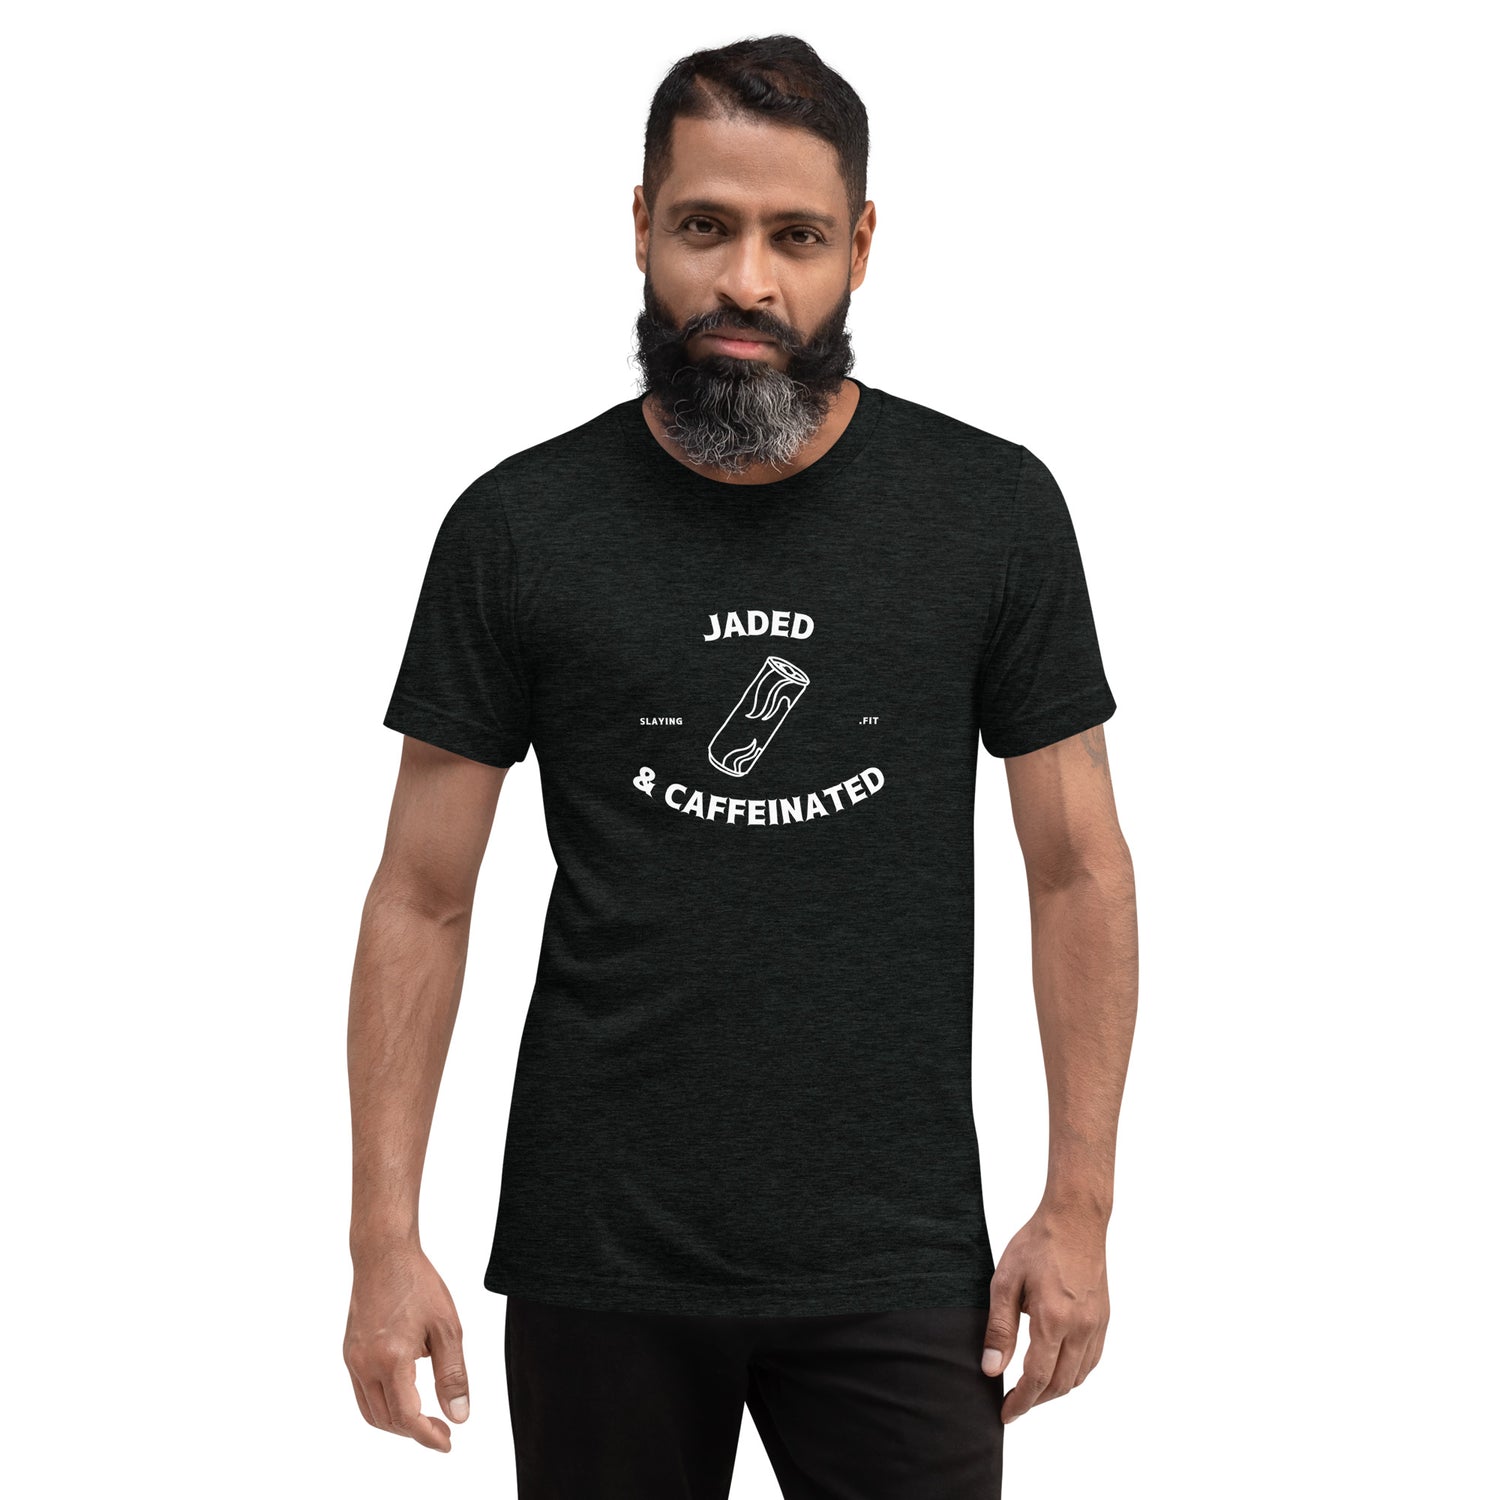 Jaded and Caffeinated Men's Short sleeve Tri-Blend T-Shirt